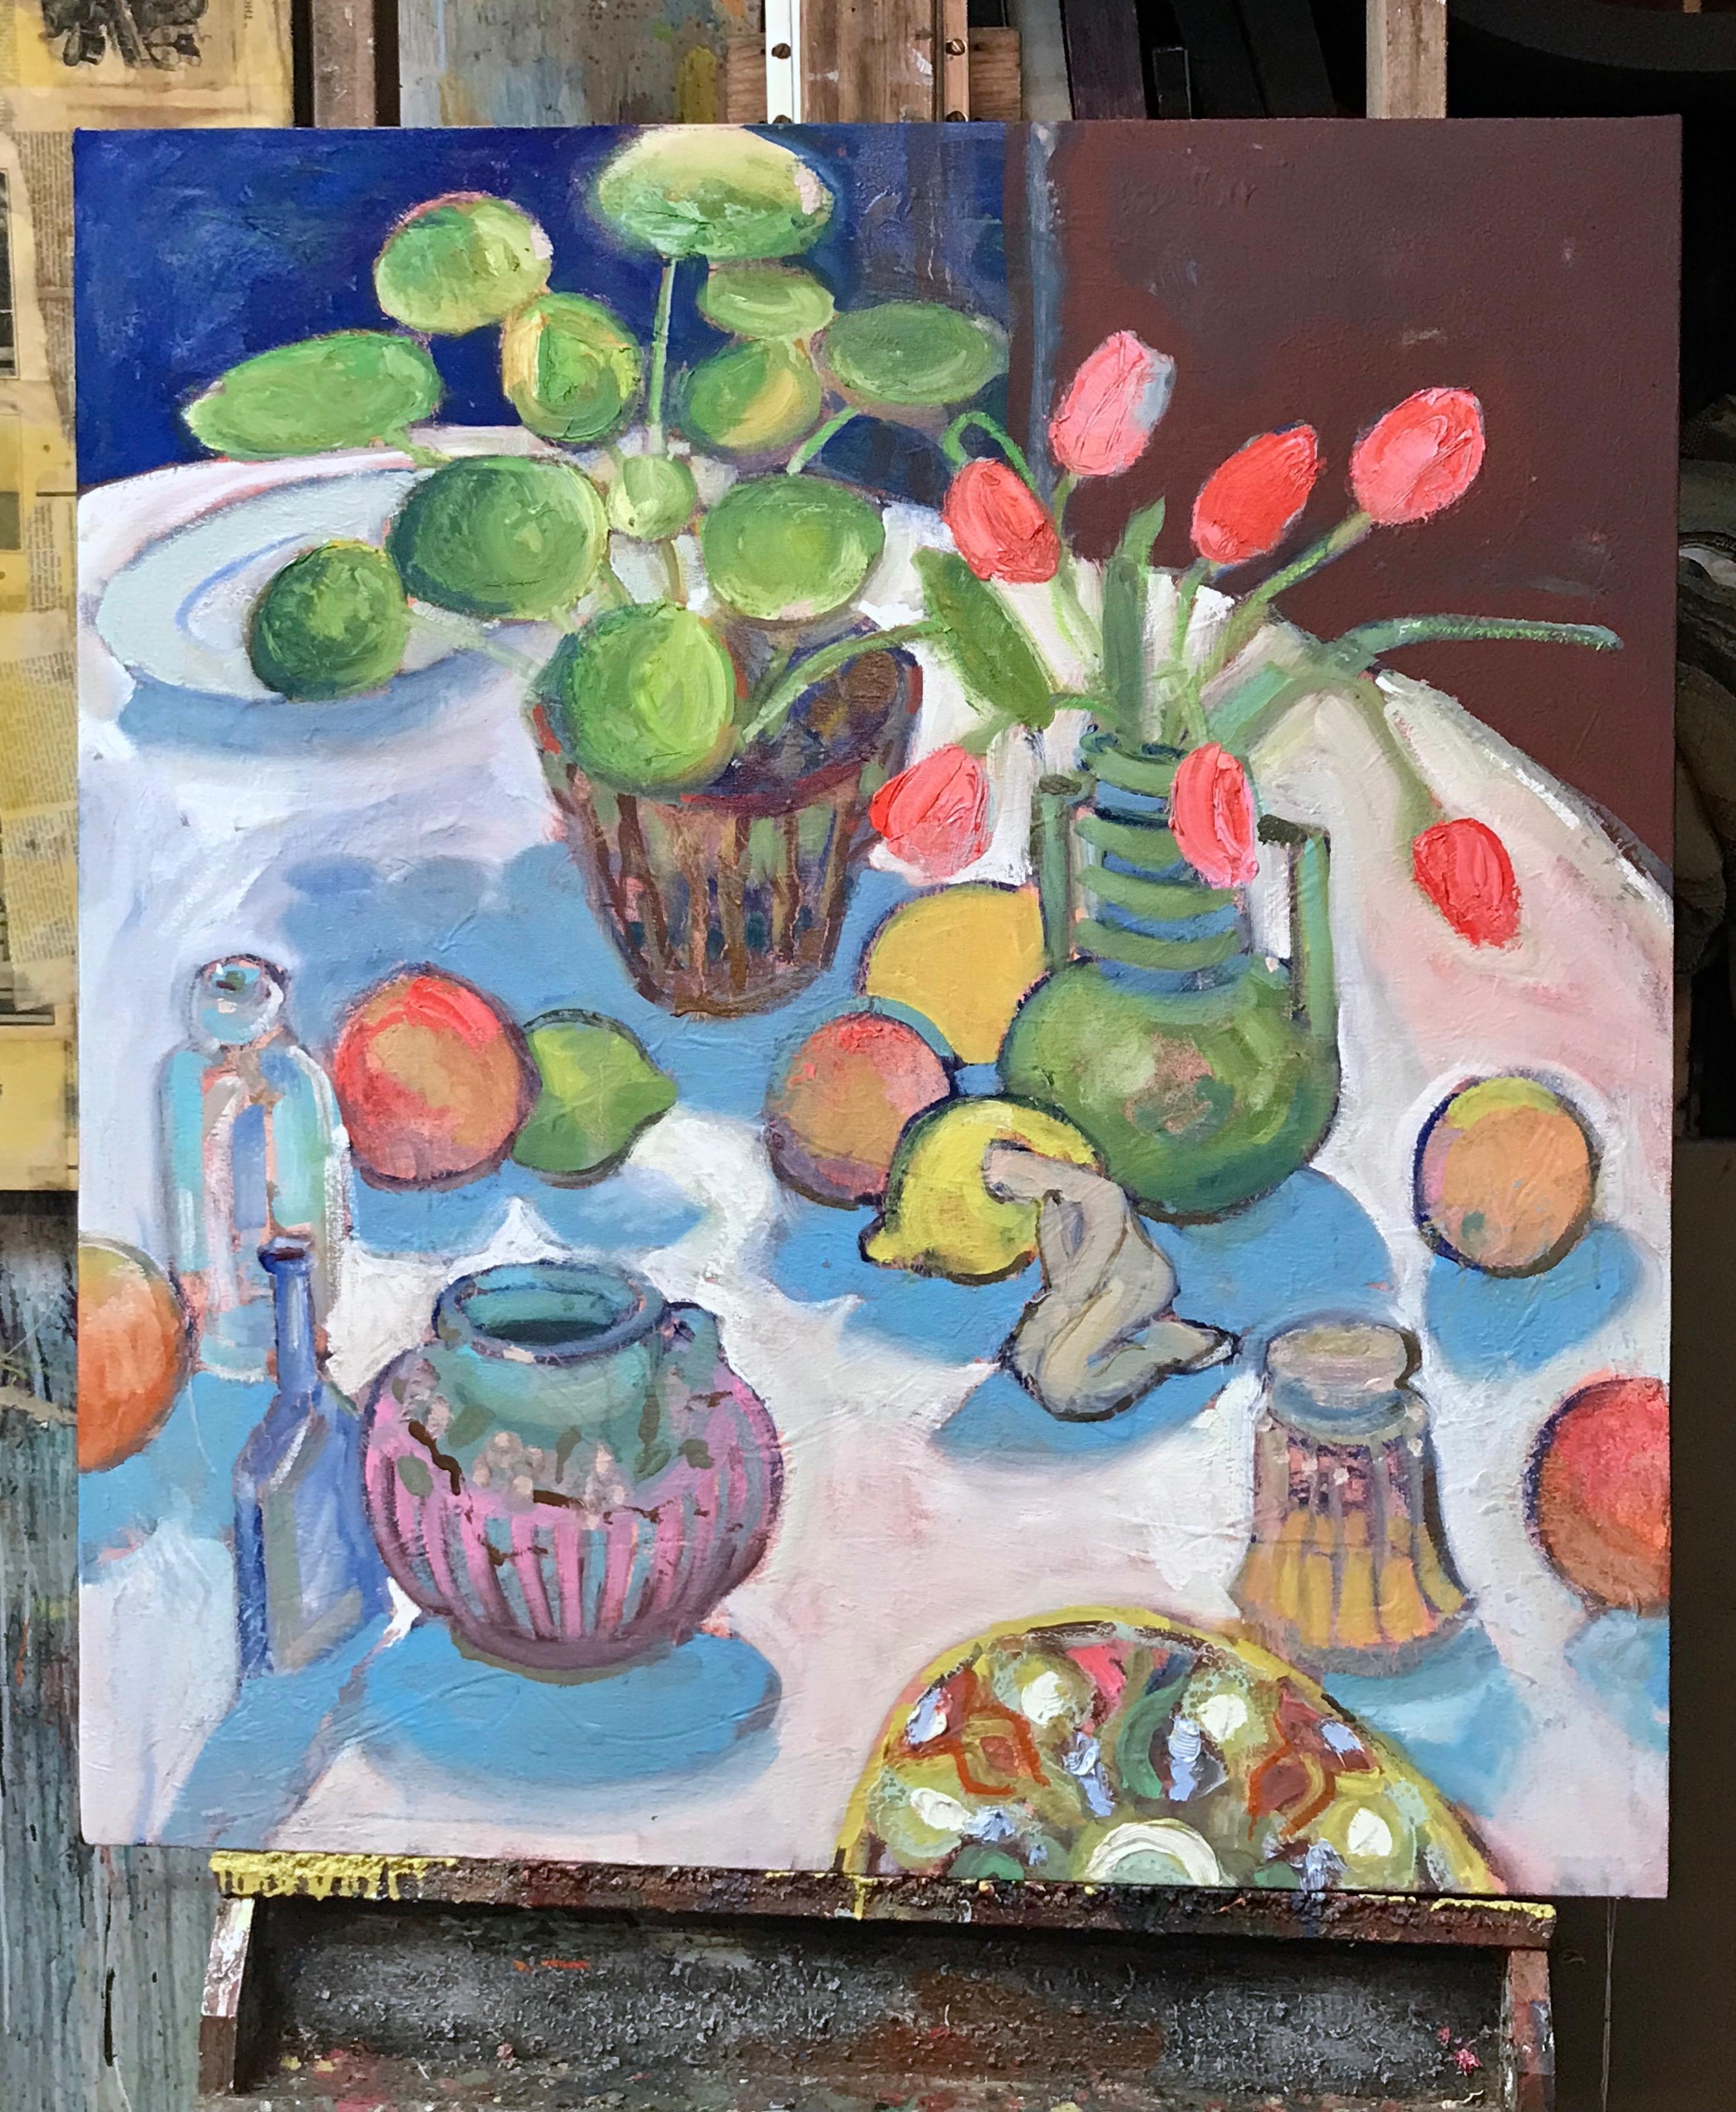 <p>Artist Comments<br />I am inspired to paint ordinary objects as compositional elements like many painters since Chardin. My goal is to get the shapes and colors to work together and direct the eye through the painting.</p><p>About the Artist<br